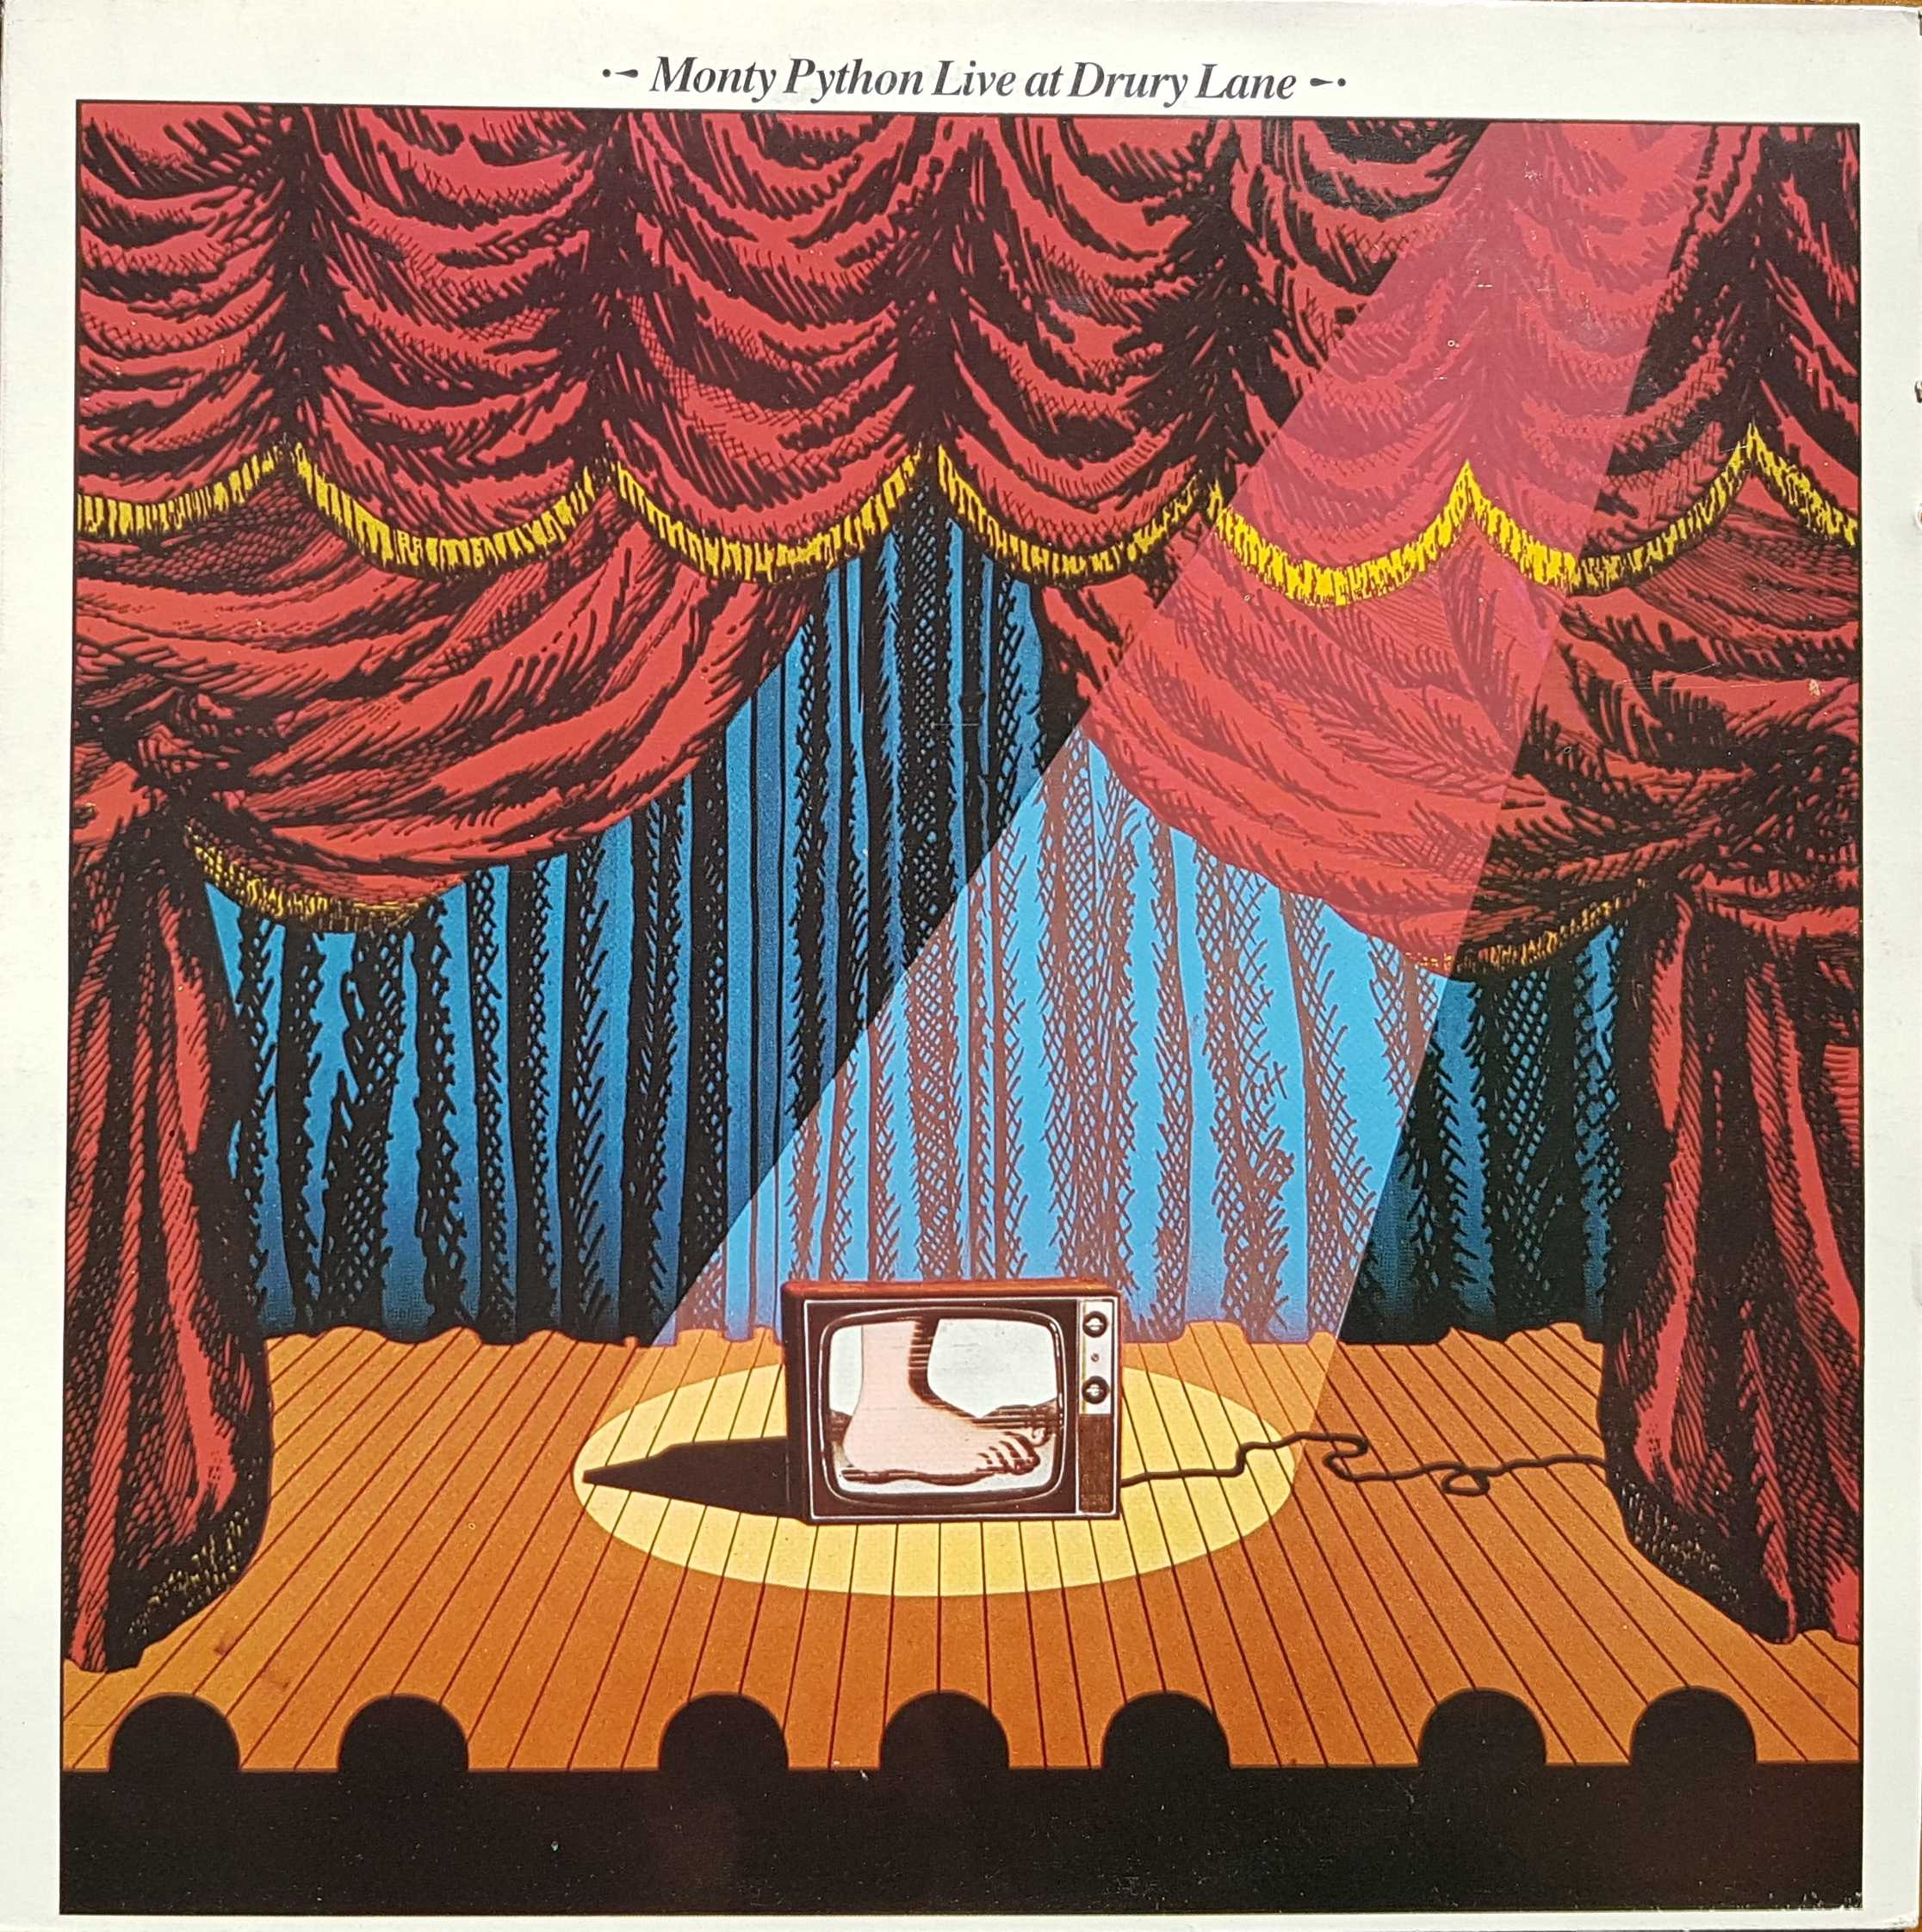 Picture of Live at the Theatre Royal, Drury Lane by artist Monty Python from the BBC albums - Records and Tapes library